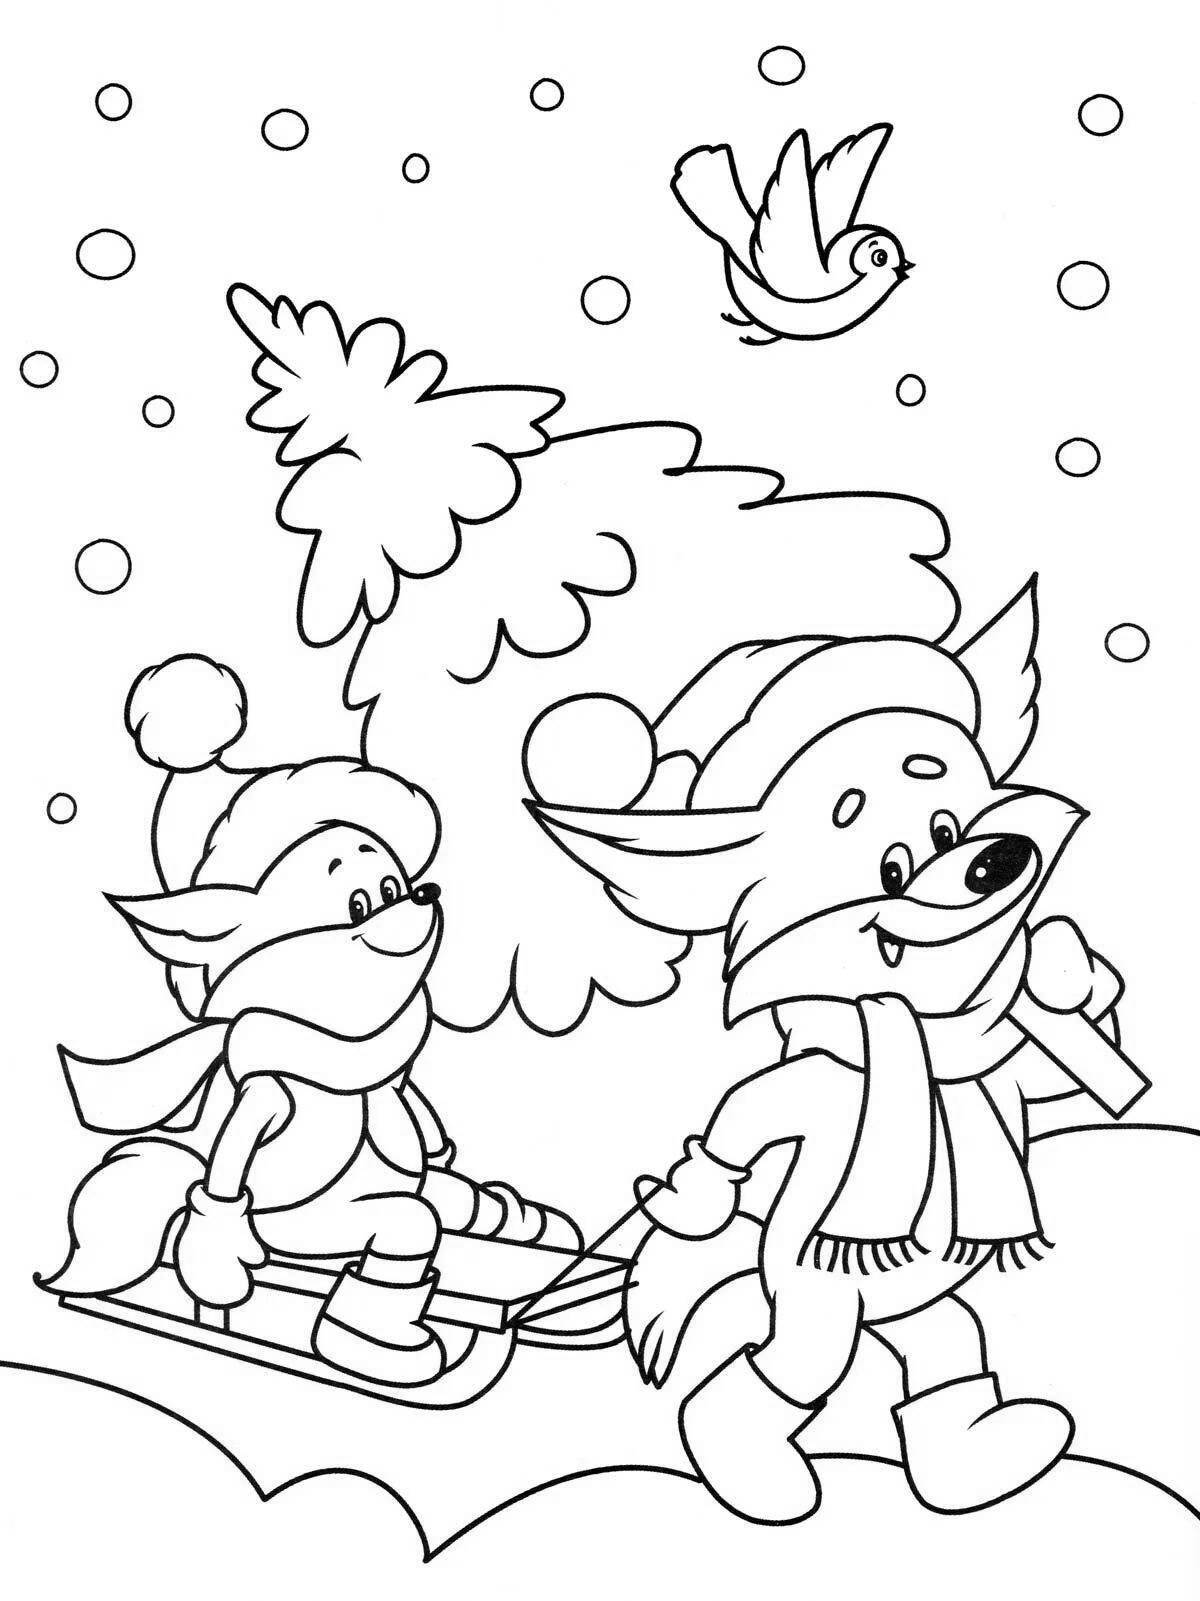 Gorgeous winter Christmas coloring book